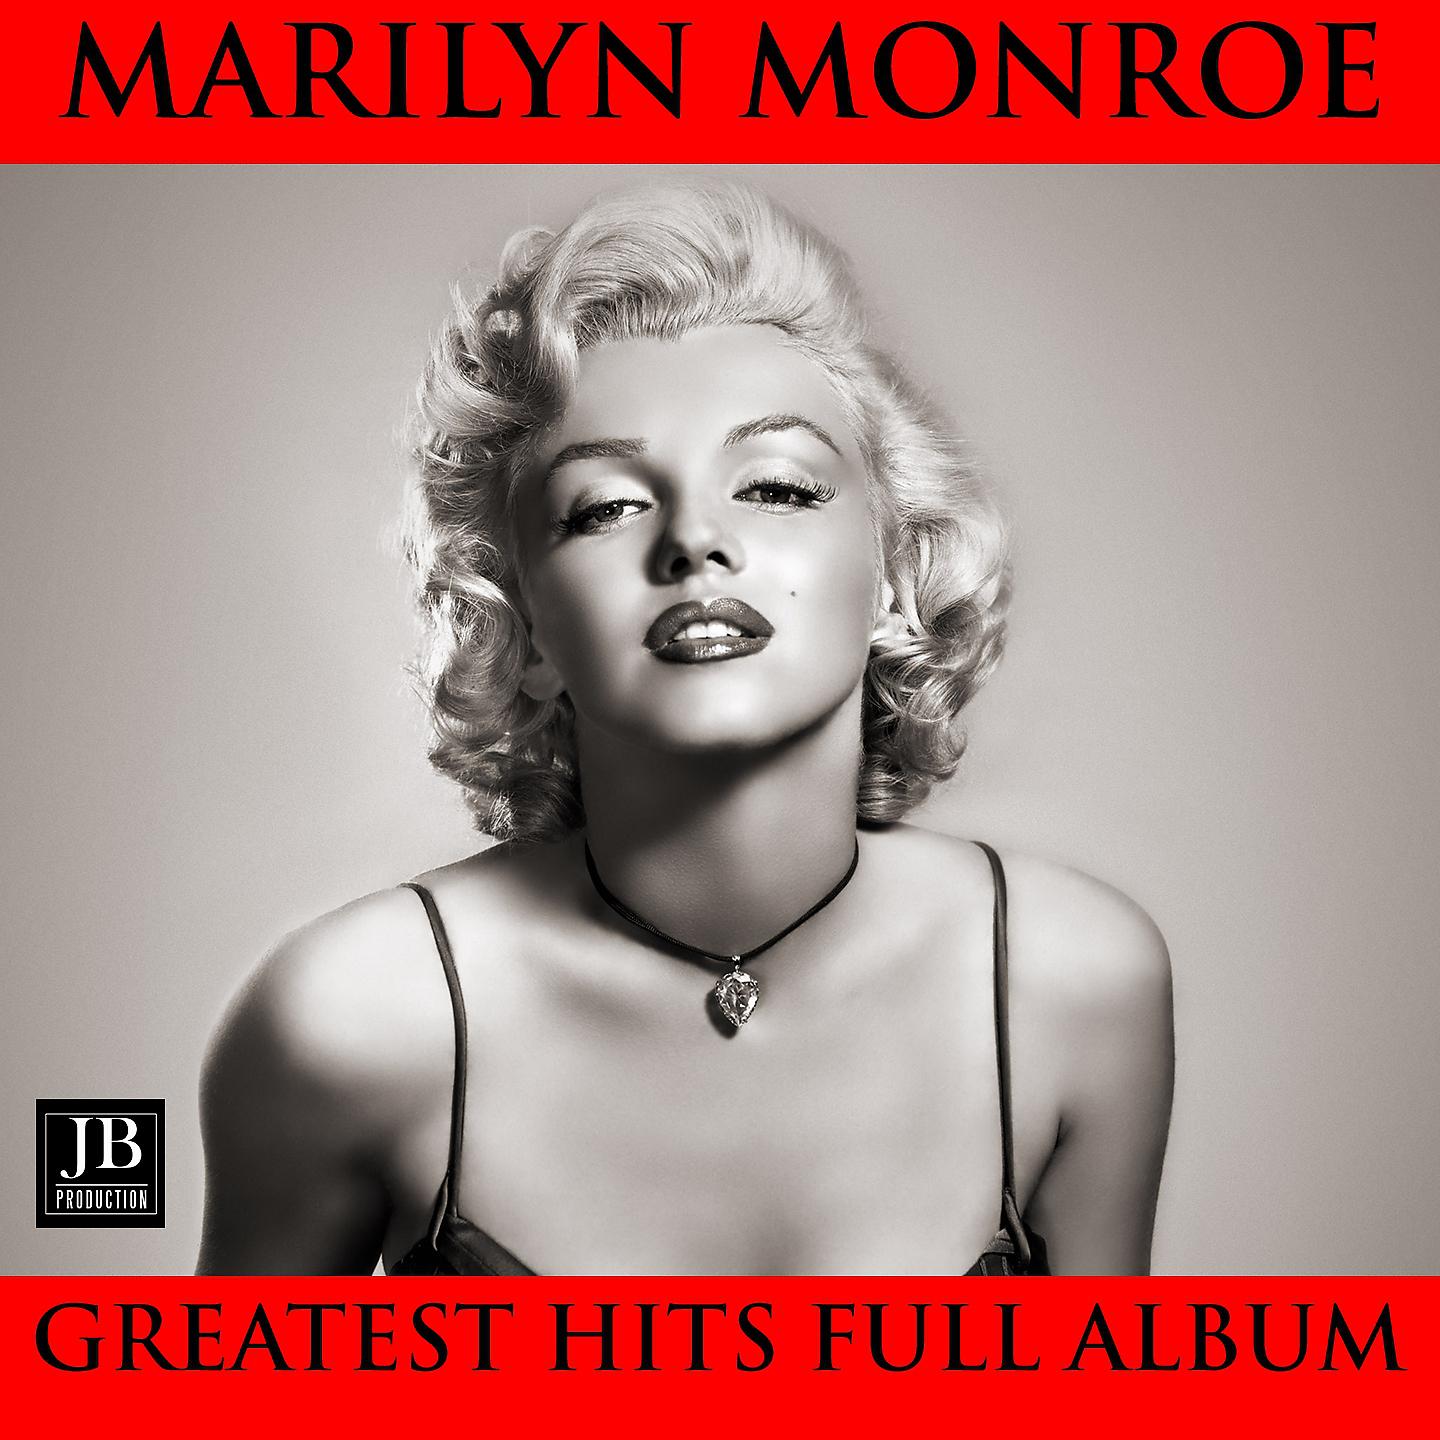 Постер альбома Marilyn Monroe Greatest Hits Full Album: Diamonds Are a Girls Best Friend / Kiss / I'm Gonna File My Claim / Every Baby Needs A Da Da Daddy / You'd Be Surprised / Incurably Romantic / I Wanna Be Loved By You / Let's Make Love / My Heart Belongs To Daddy /